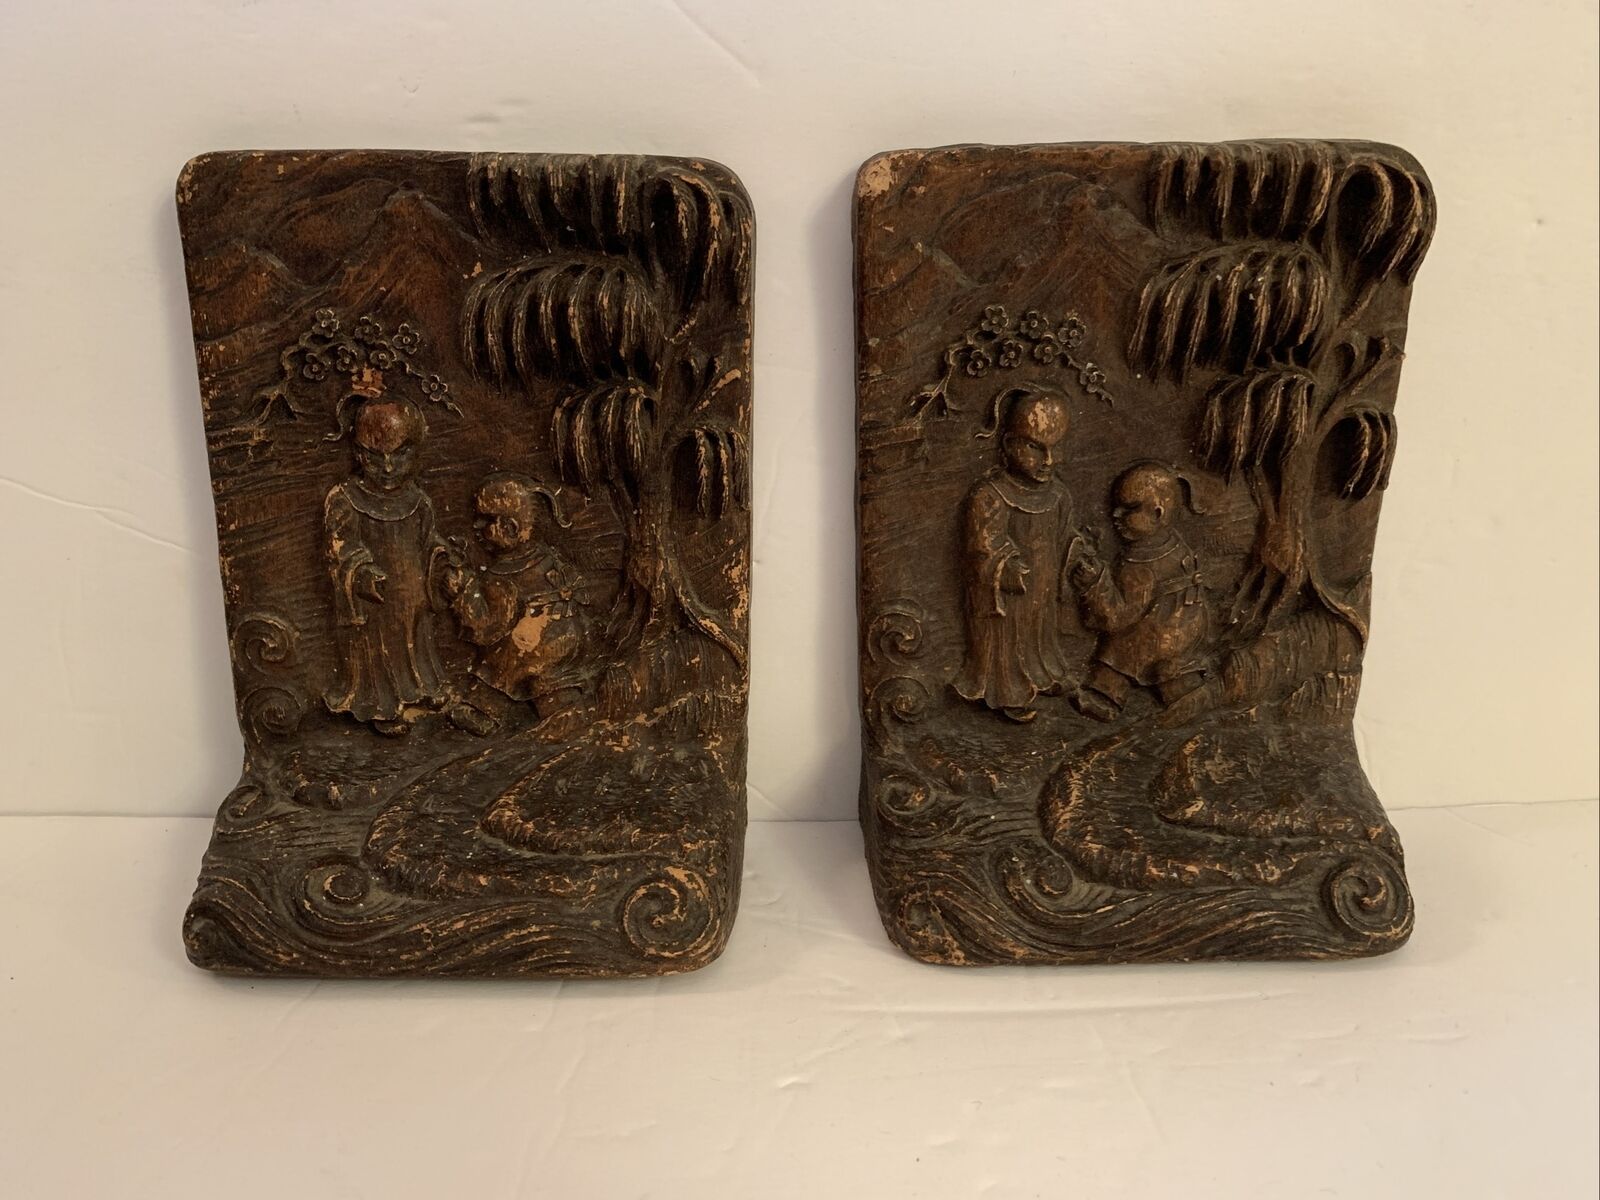 Chinese Buddhas Under Pine Tree Bookends 6.75” Tall RARE Vintage